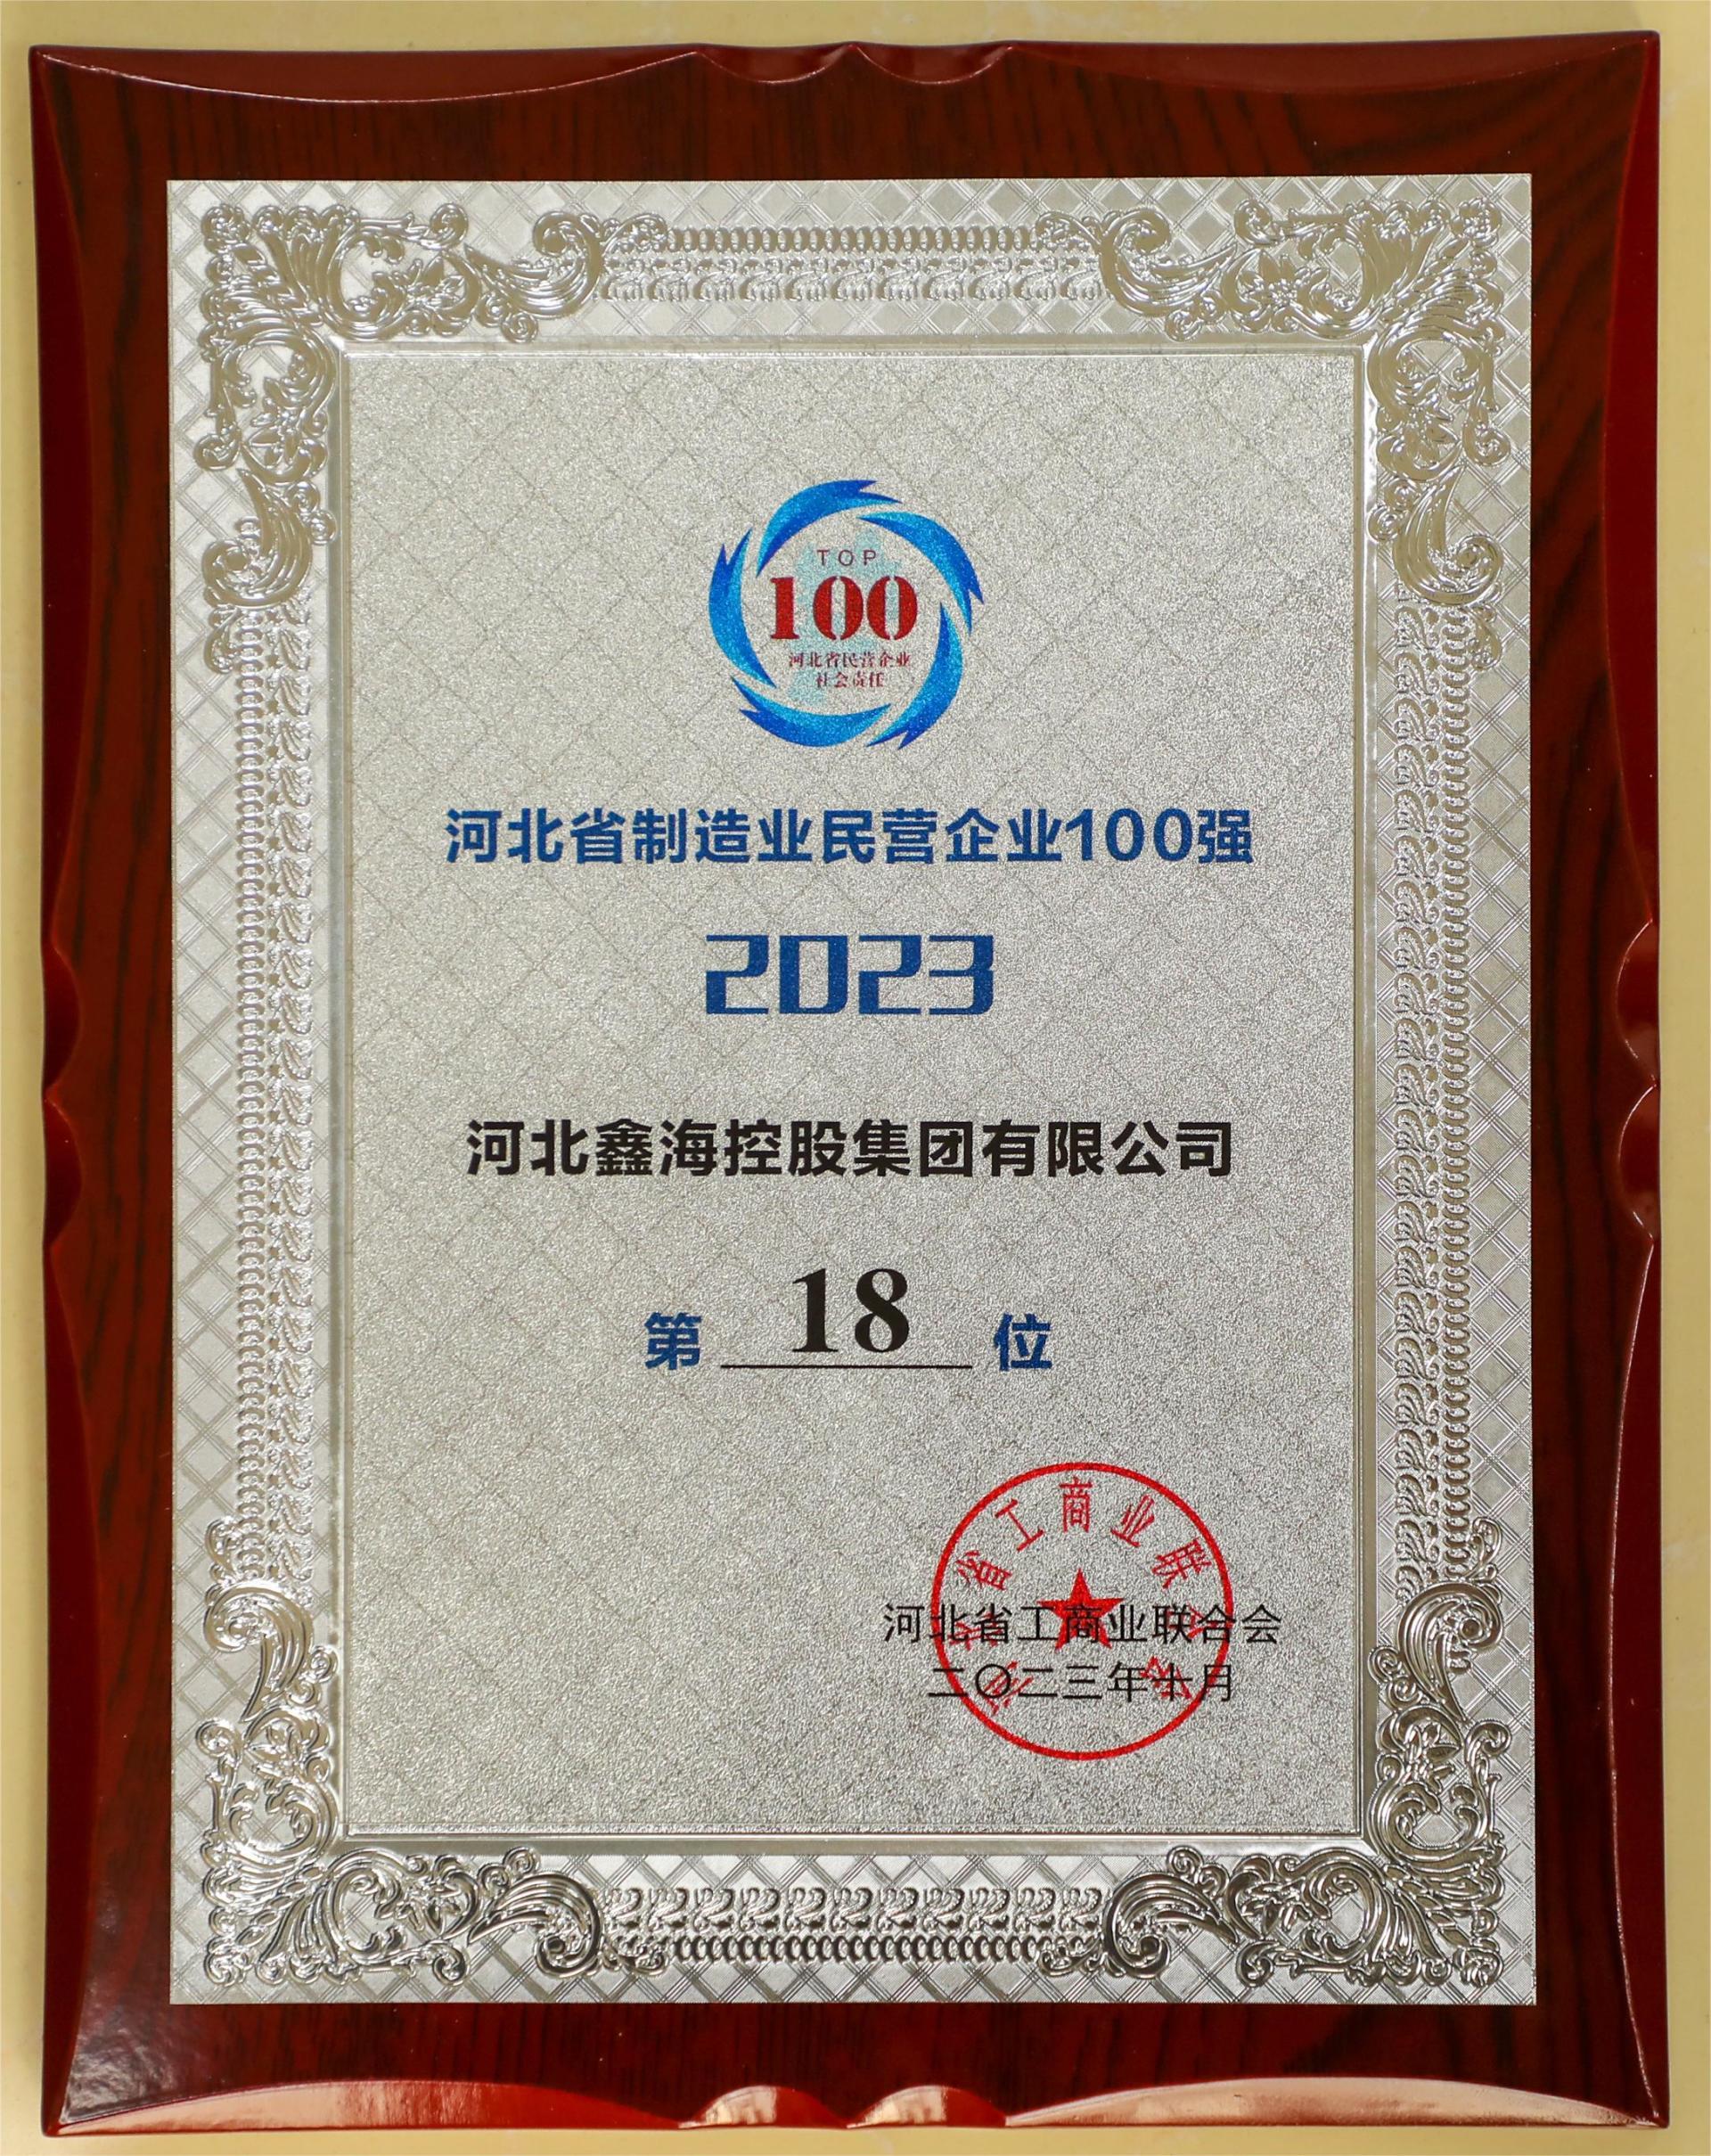 Xinhai Holding Group has been listed in the list of top 100 private enterprises and top 100 manufacturing private enterprises in Hebei Province in 2023.